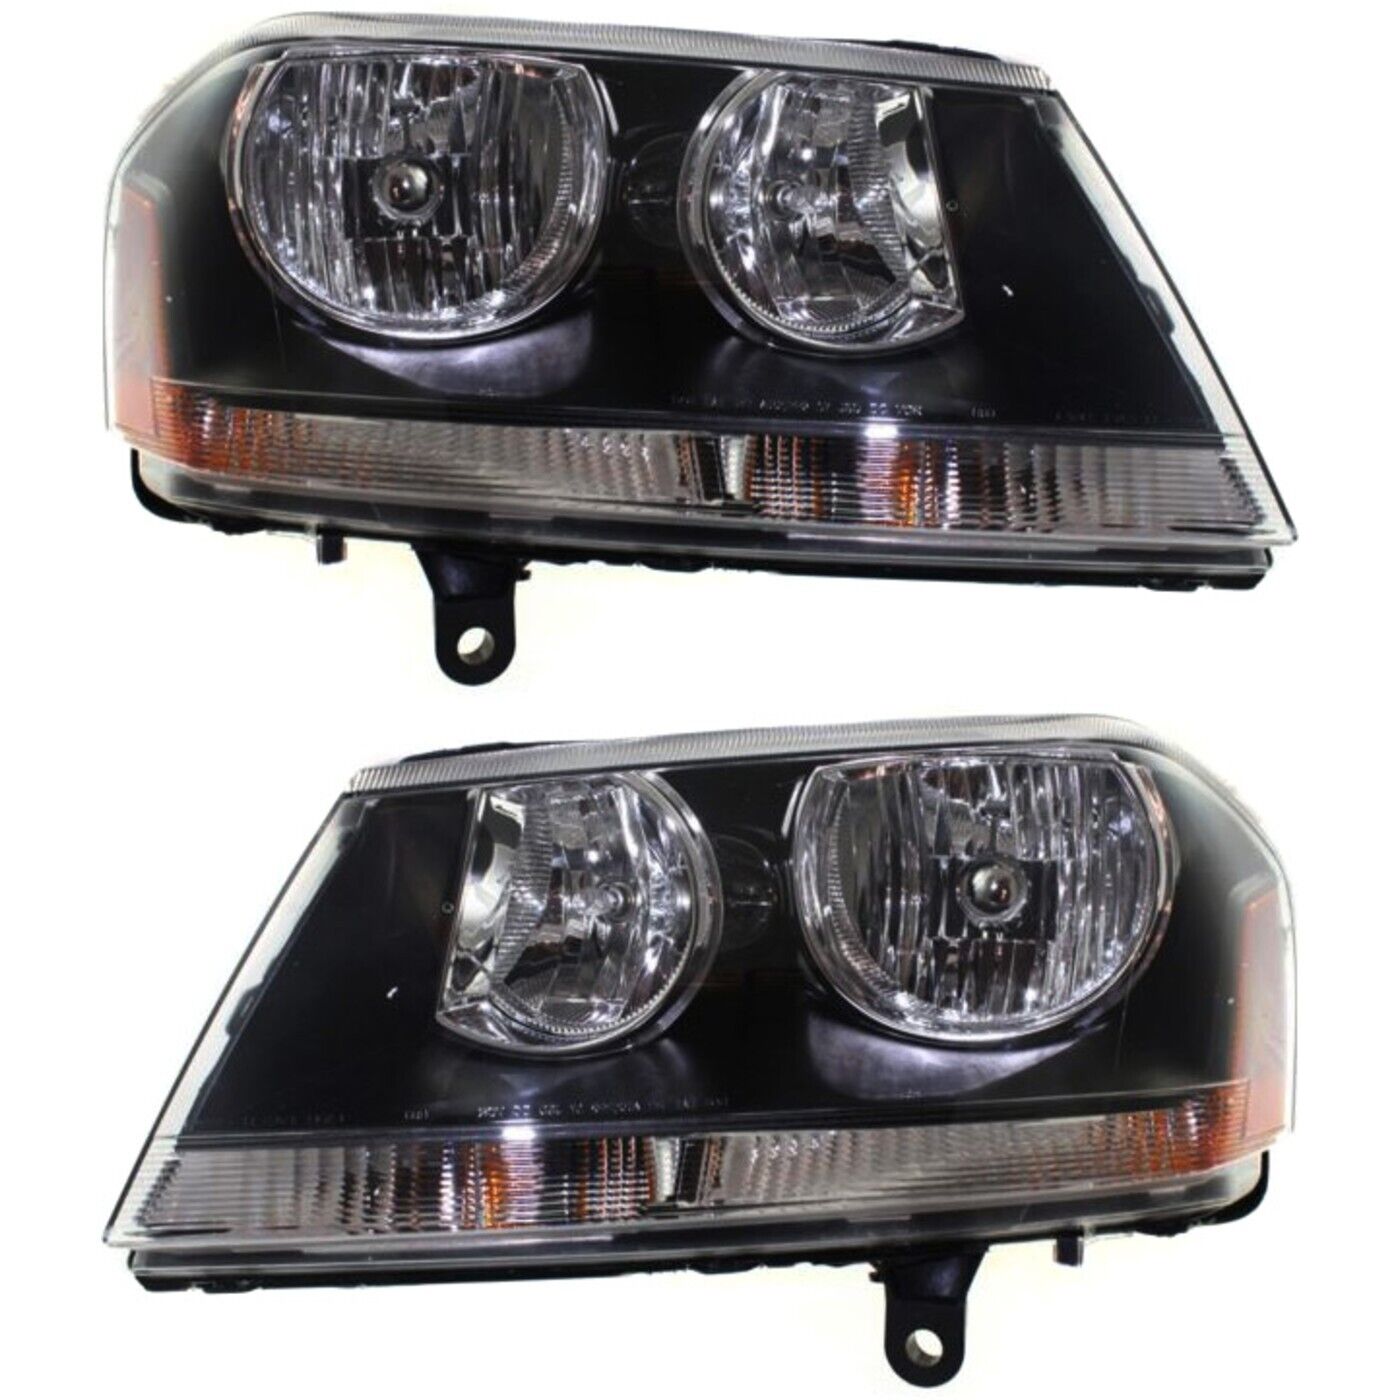 Black 08-14 For Dodge Avenger Headlights Headlamps Replacement 08-14 Left+Right